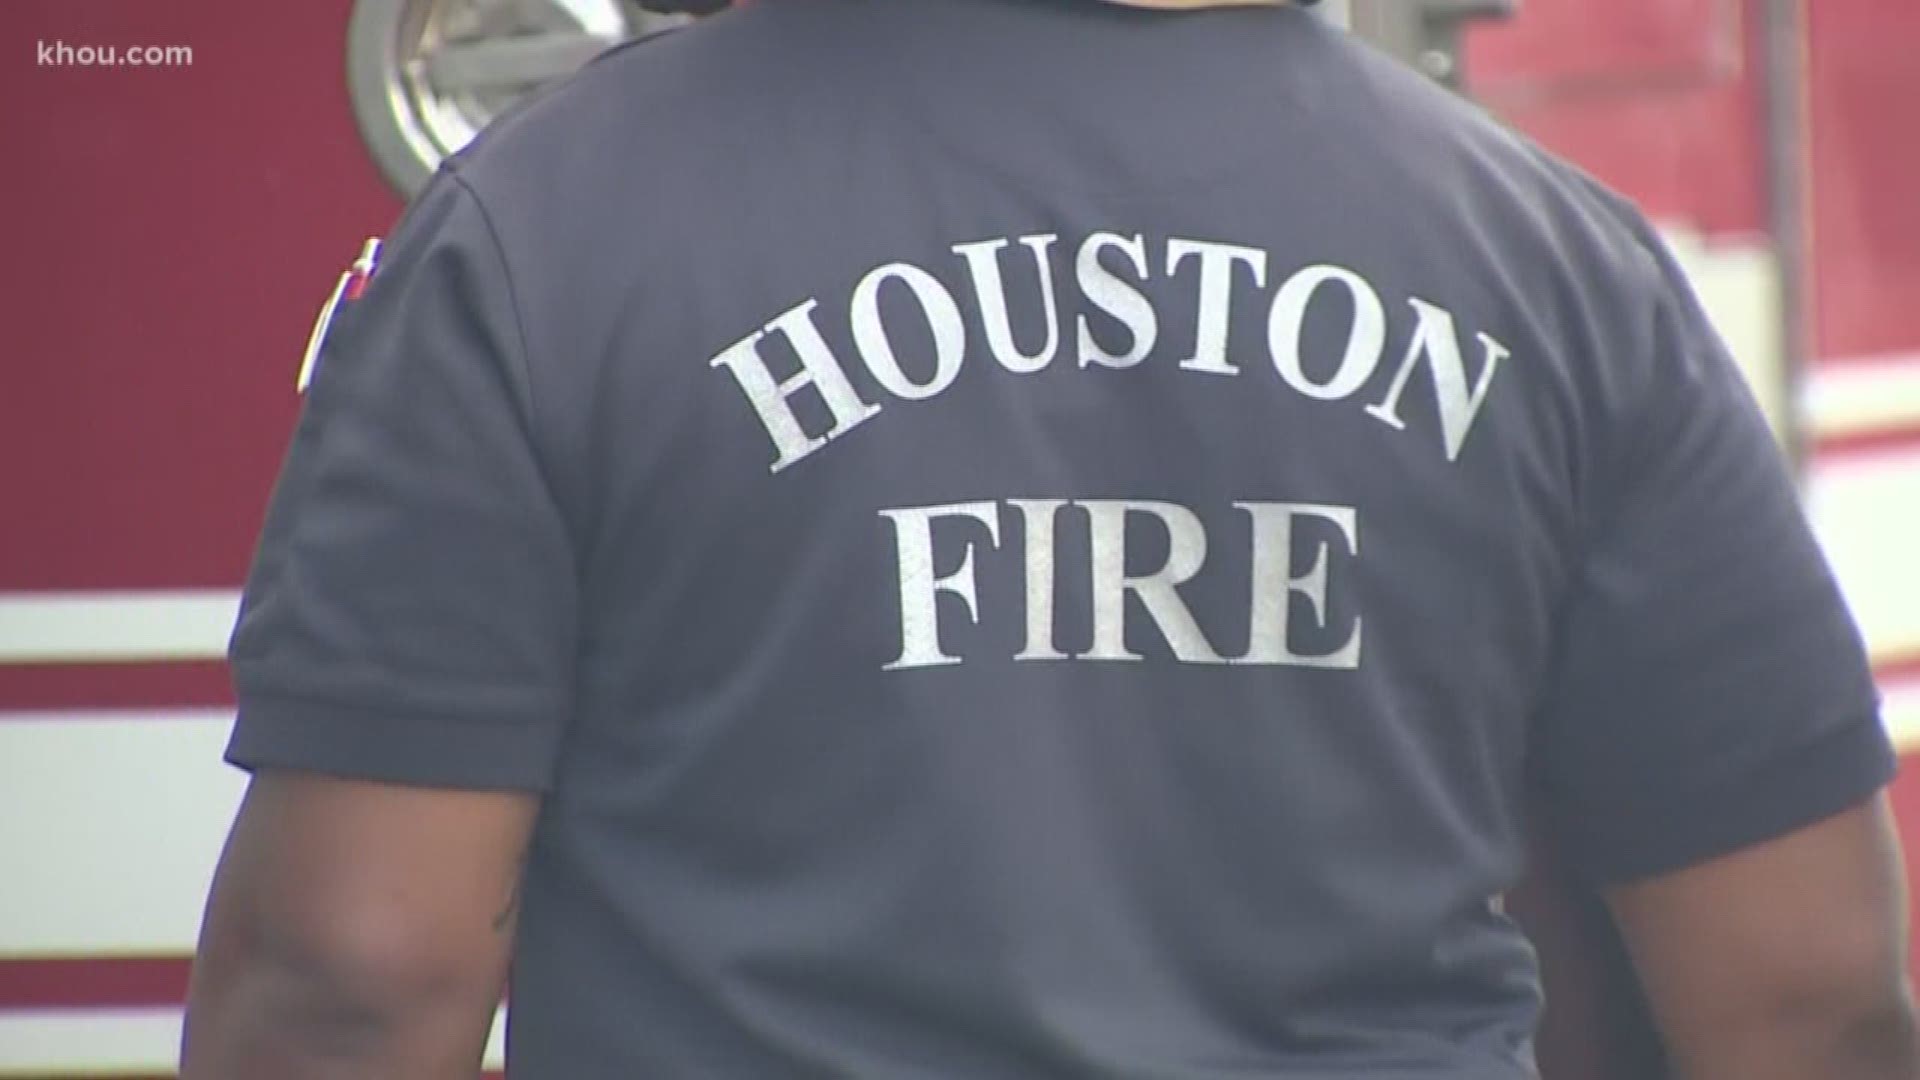 The Houston Professional Firefighter's Association says at least a dozen fire trucks have been operating in the more than 100-degree heat without working air conditioning.